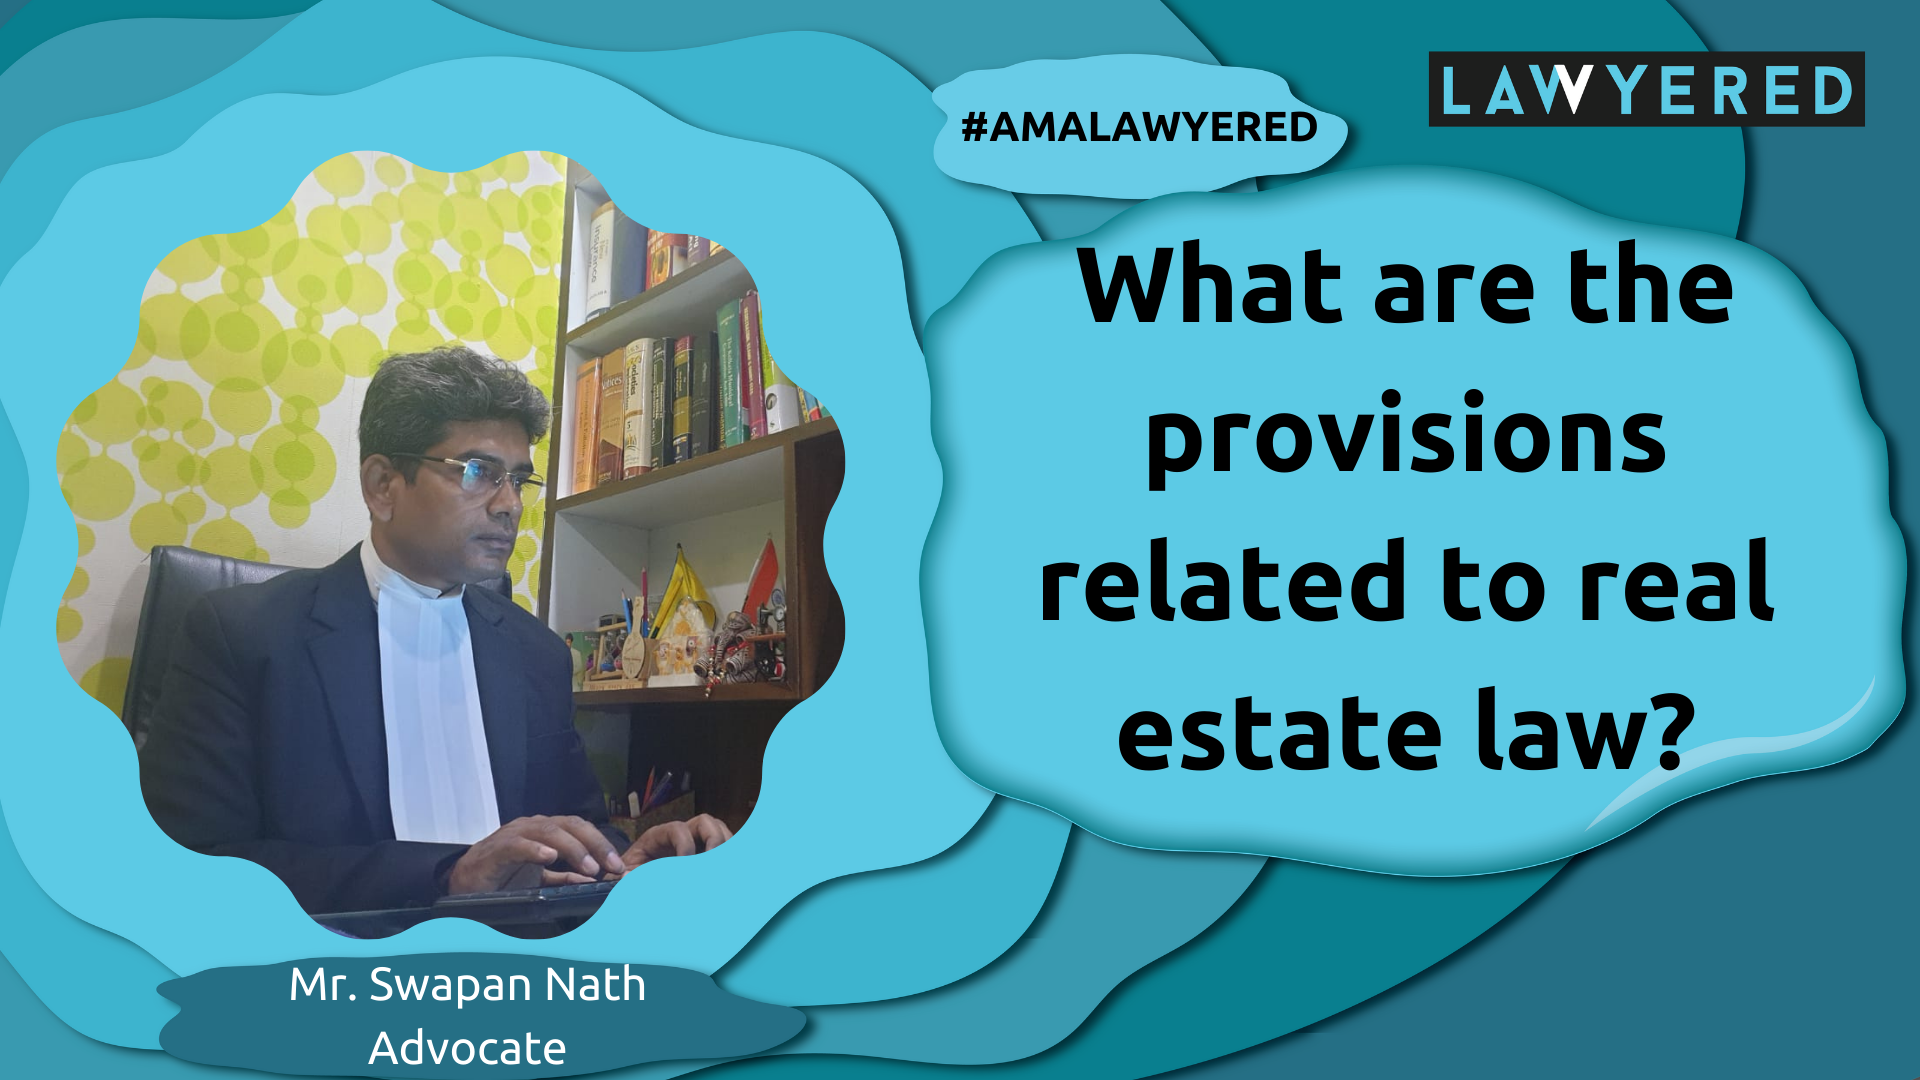 Provisions related to real estate #AMALawyered​ by Adv. Swapan Nath NATH